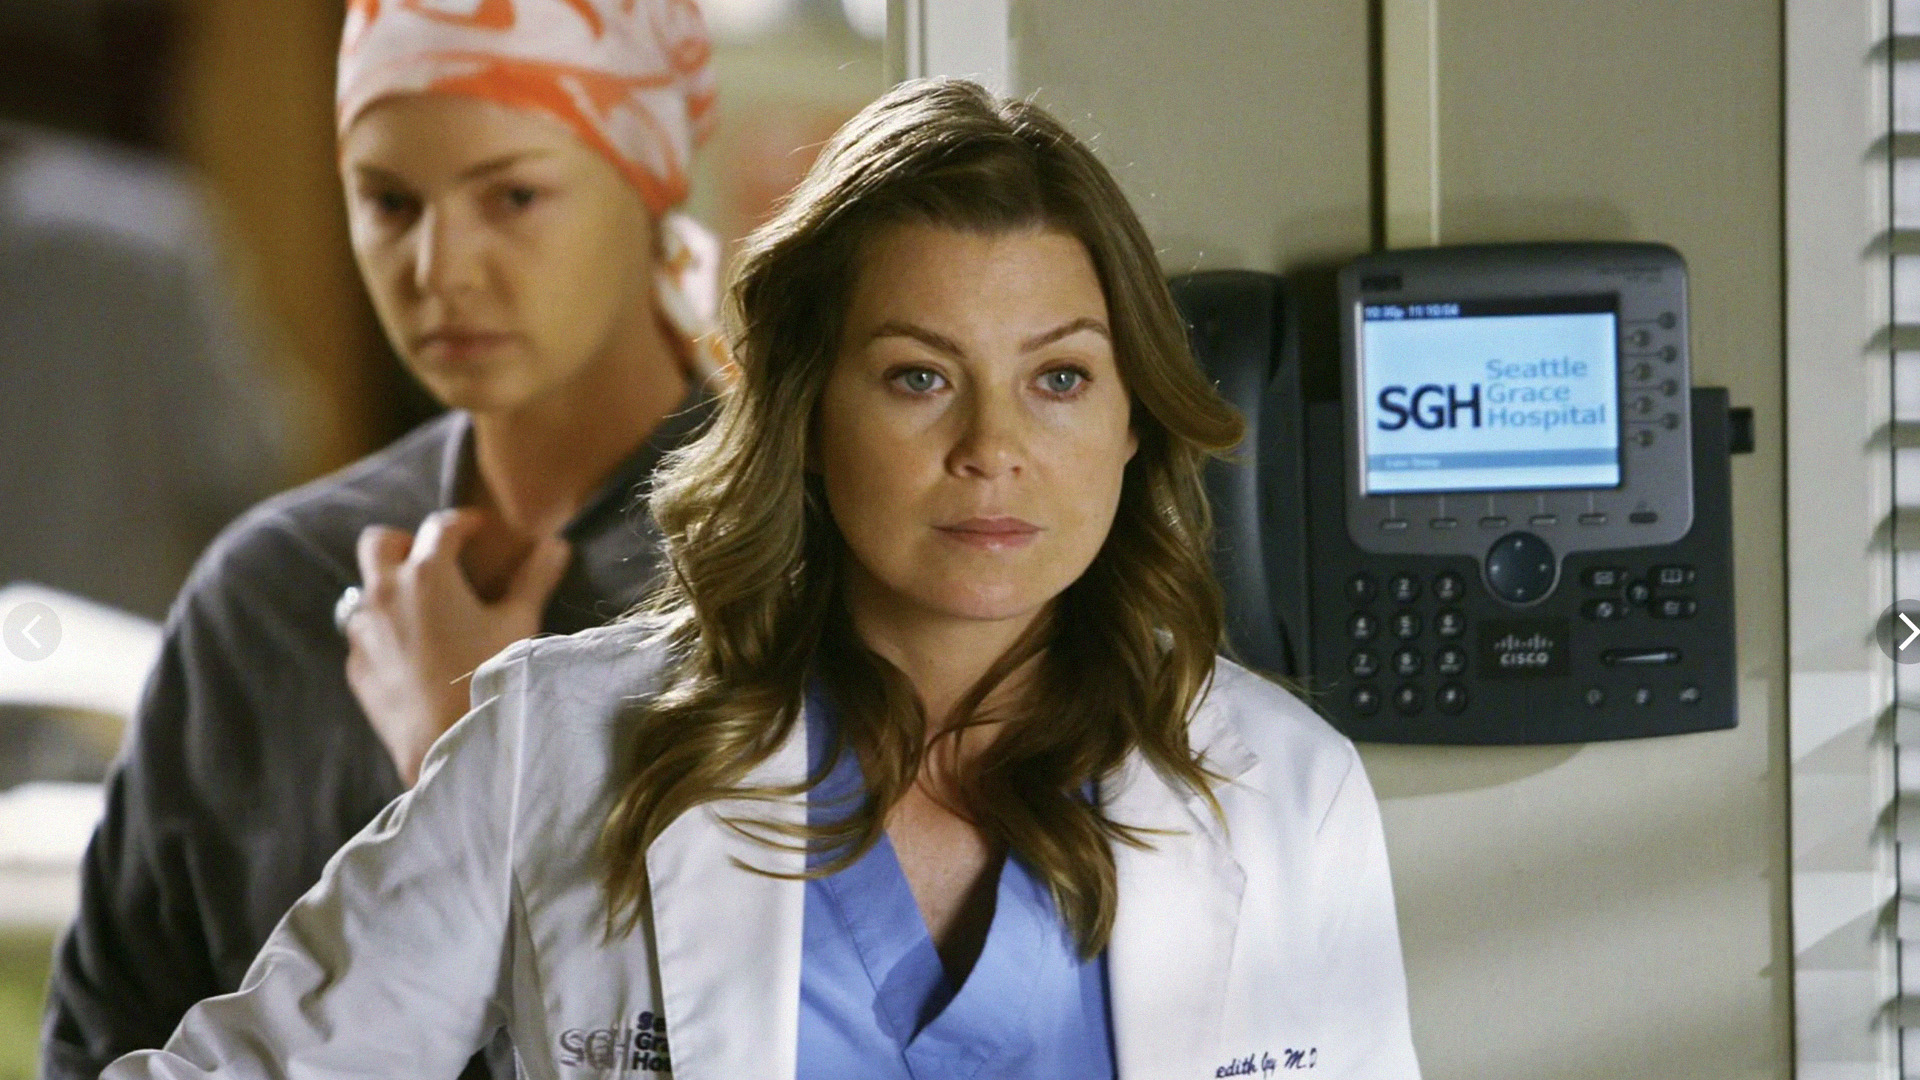 Grey's Anatomy's Biggest Betrayal: 3 Characters We Still Can't Believe They Wrote Out